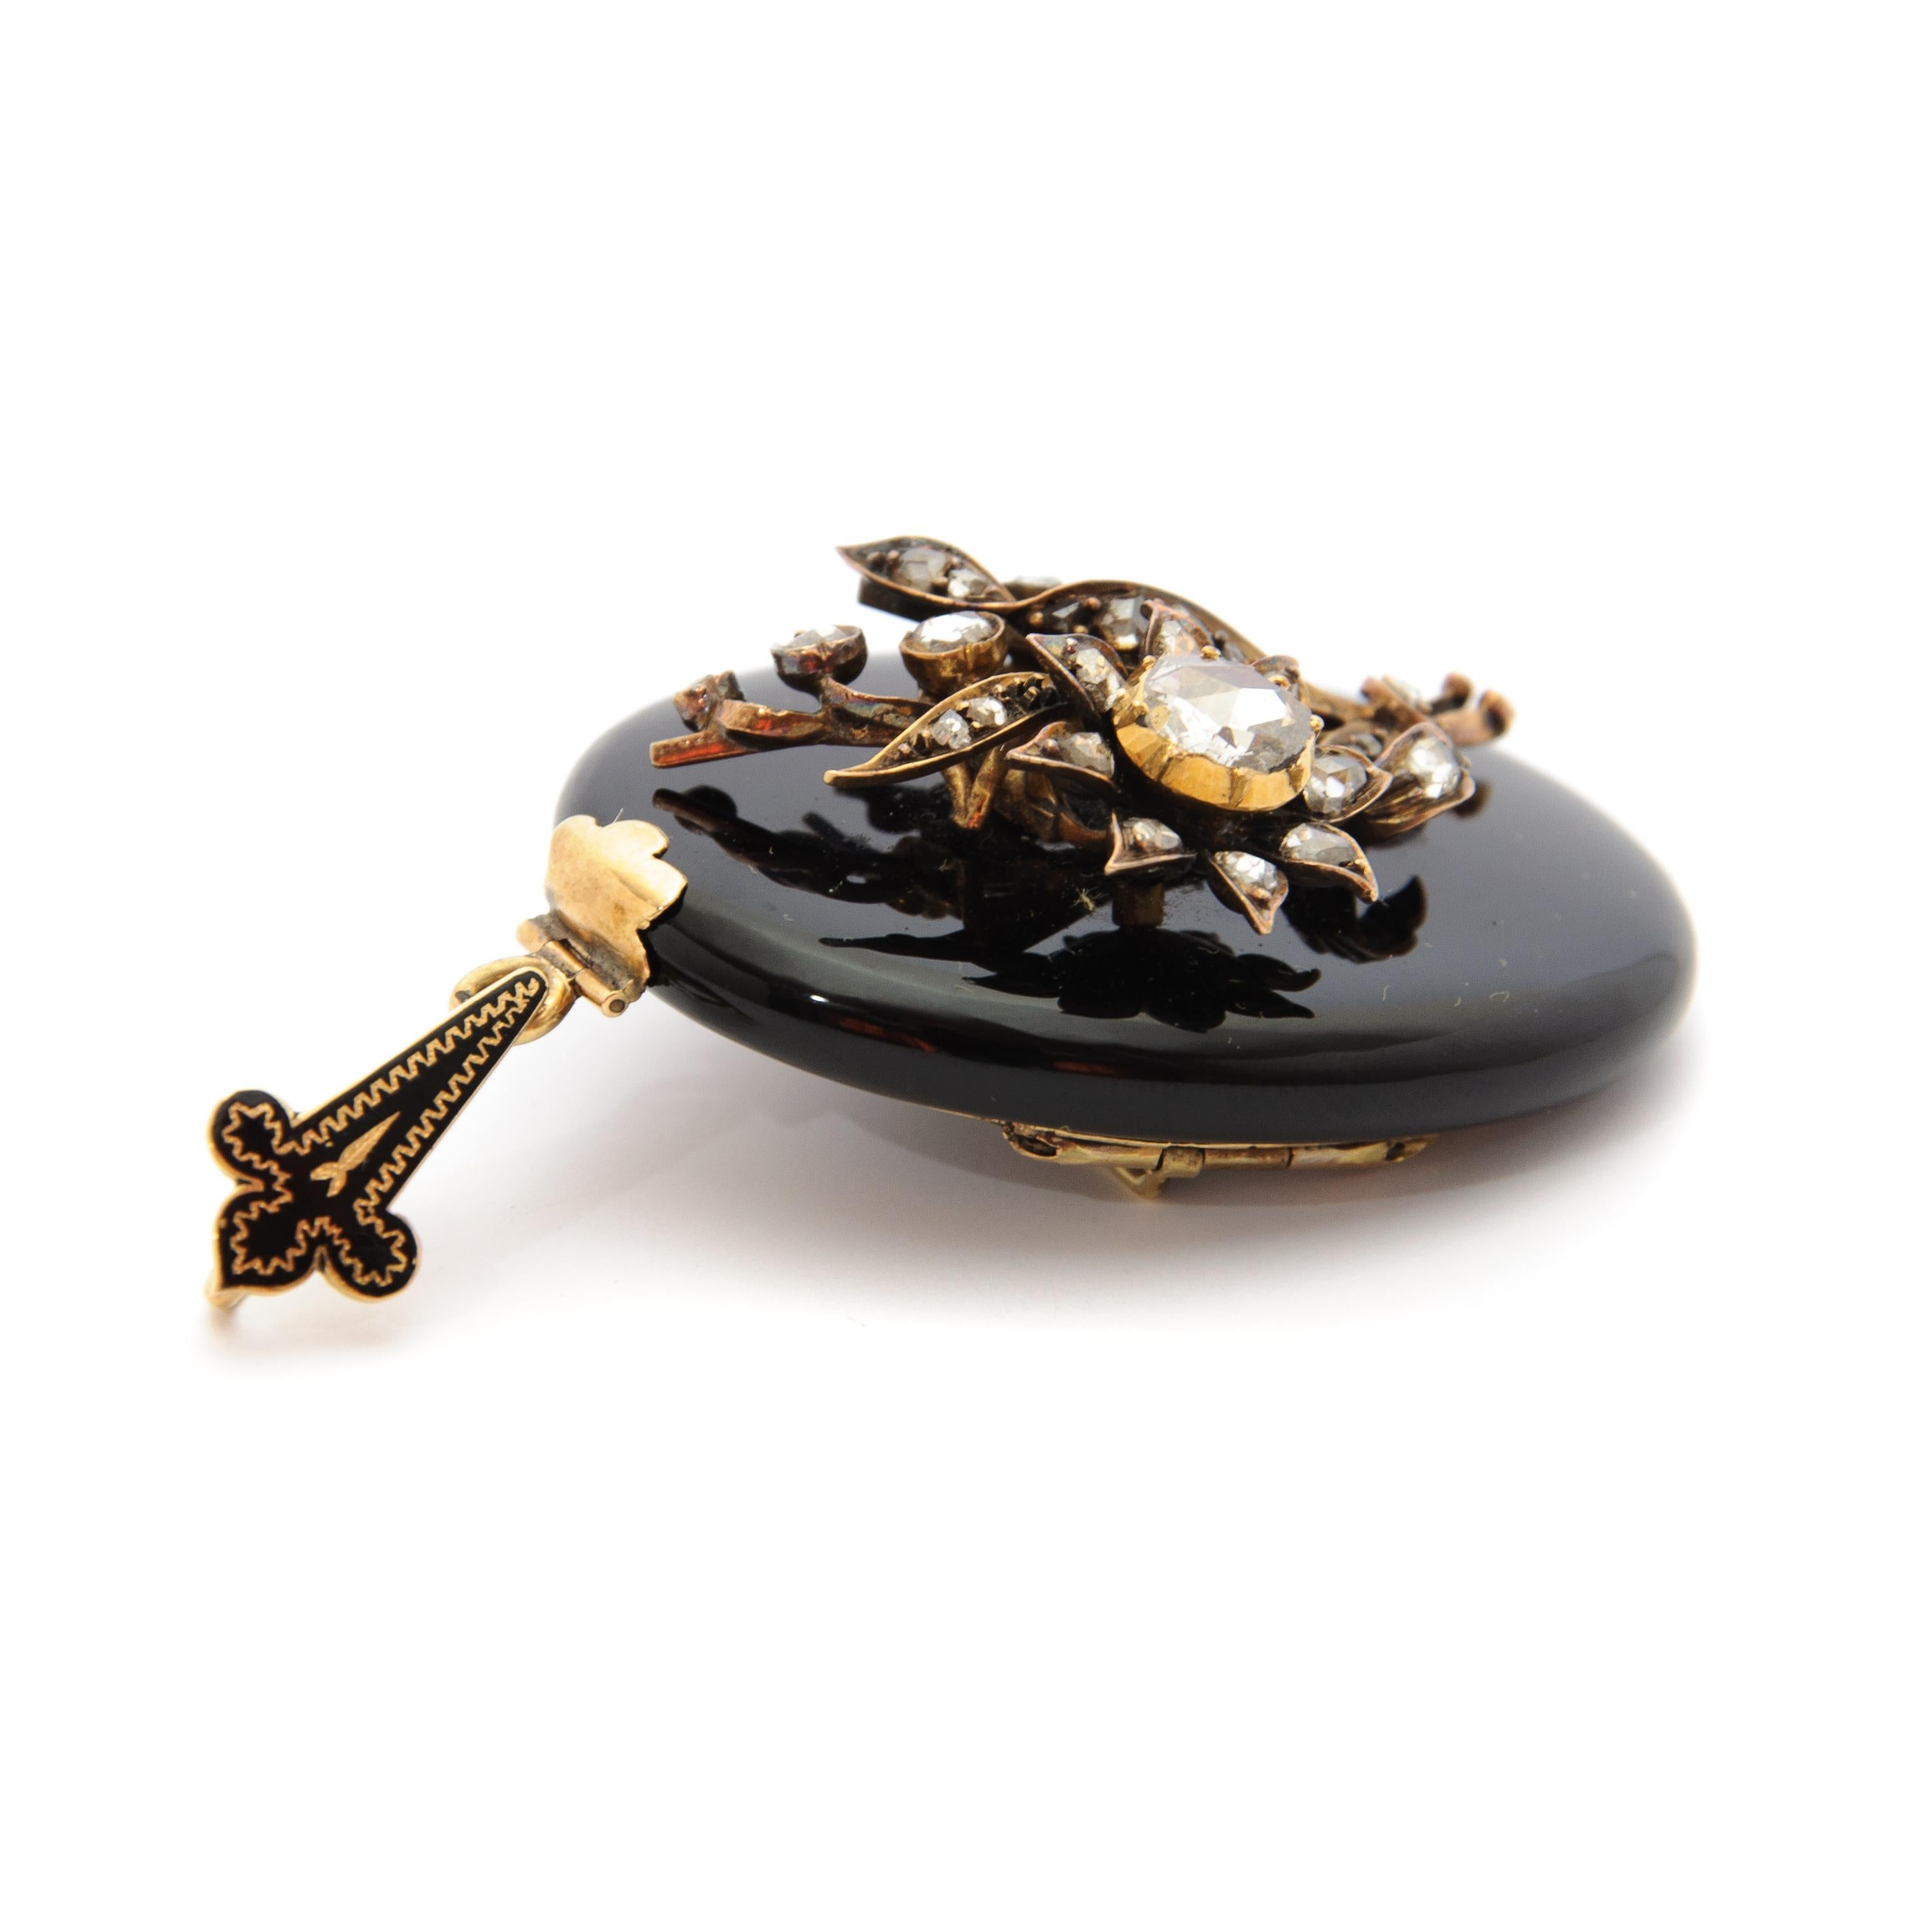 Magnificent antique onyx locket pendant brooch featuring many gorgeous diamonds. This locket pendant featuring a bouquet applique with many rose cut diamonds, approximately 0,60 carats in total. This 14 karat gold jewel can also be worn as a